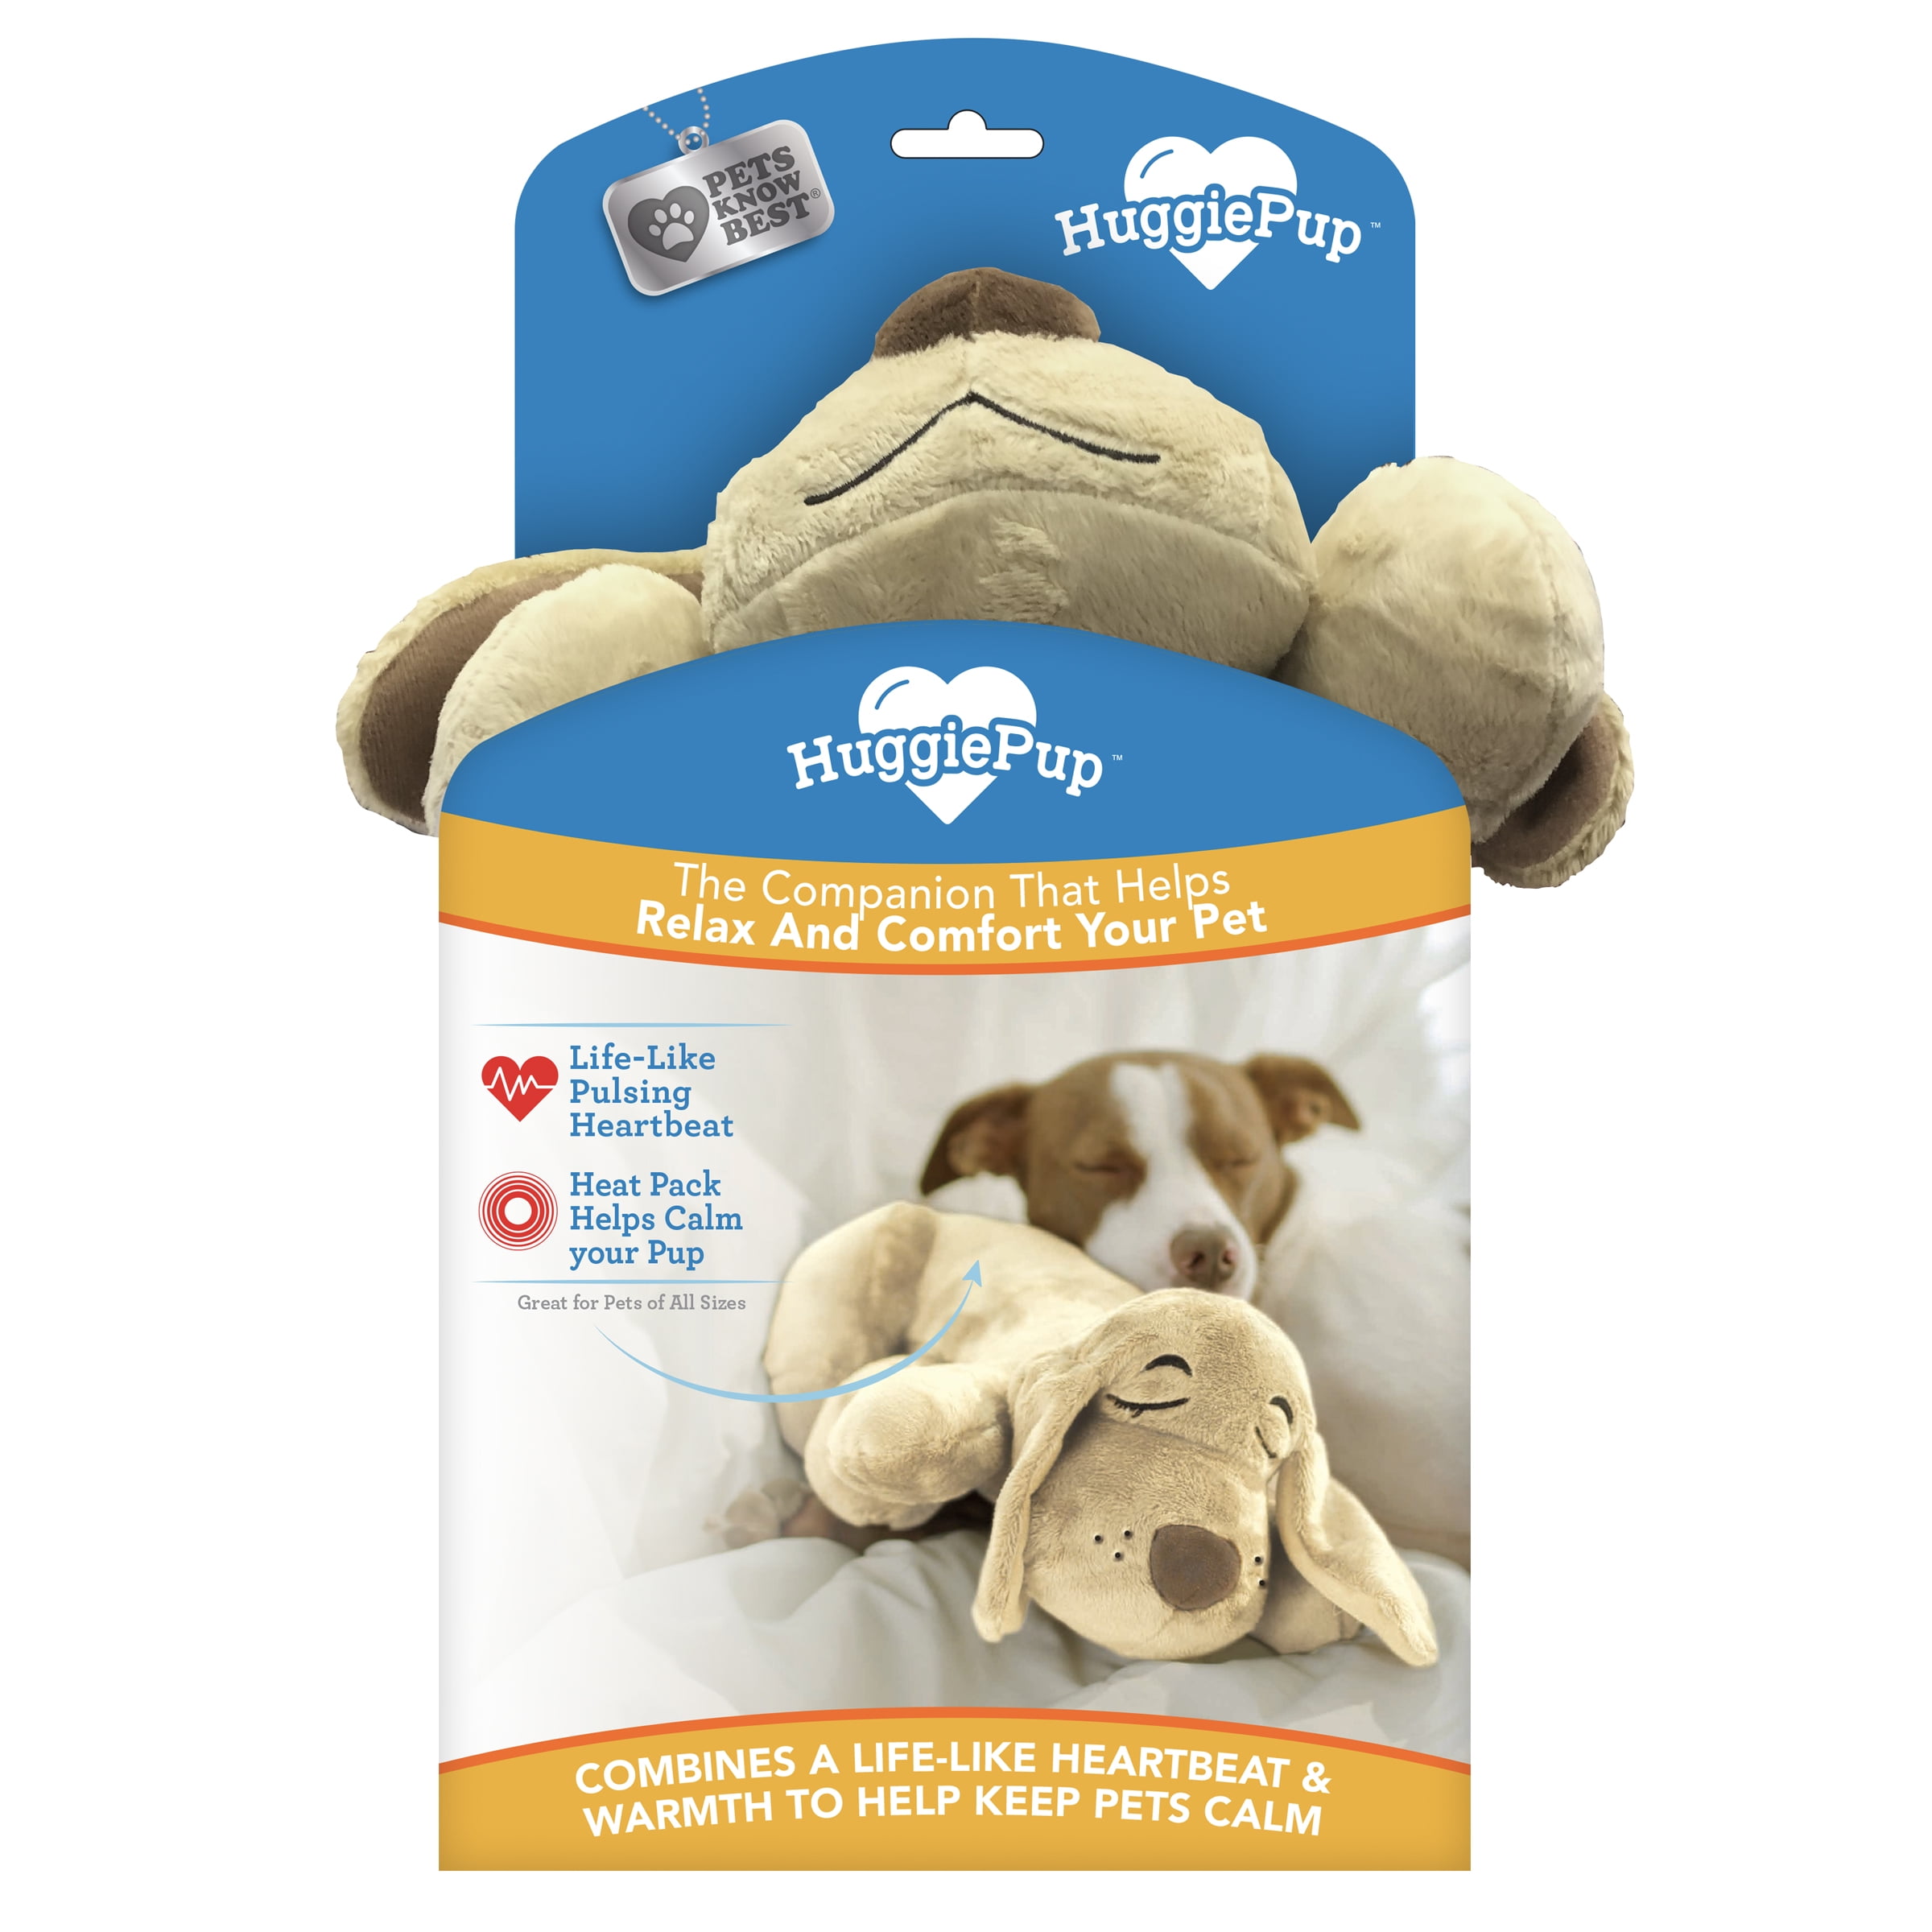 Snuggle Puppy Reviews - Paw of Approval - The Dodo